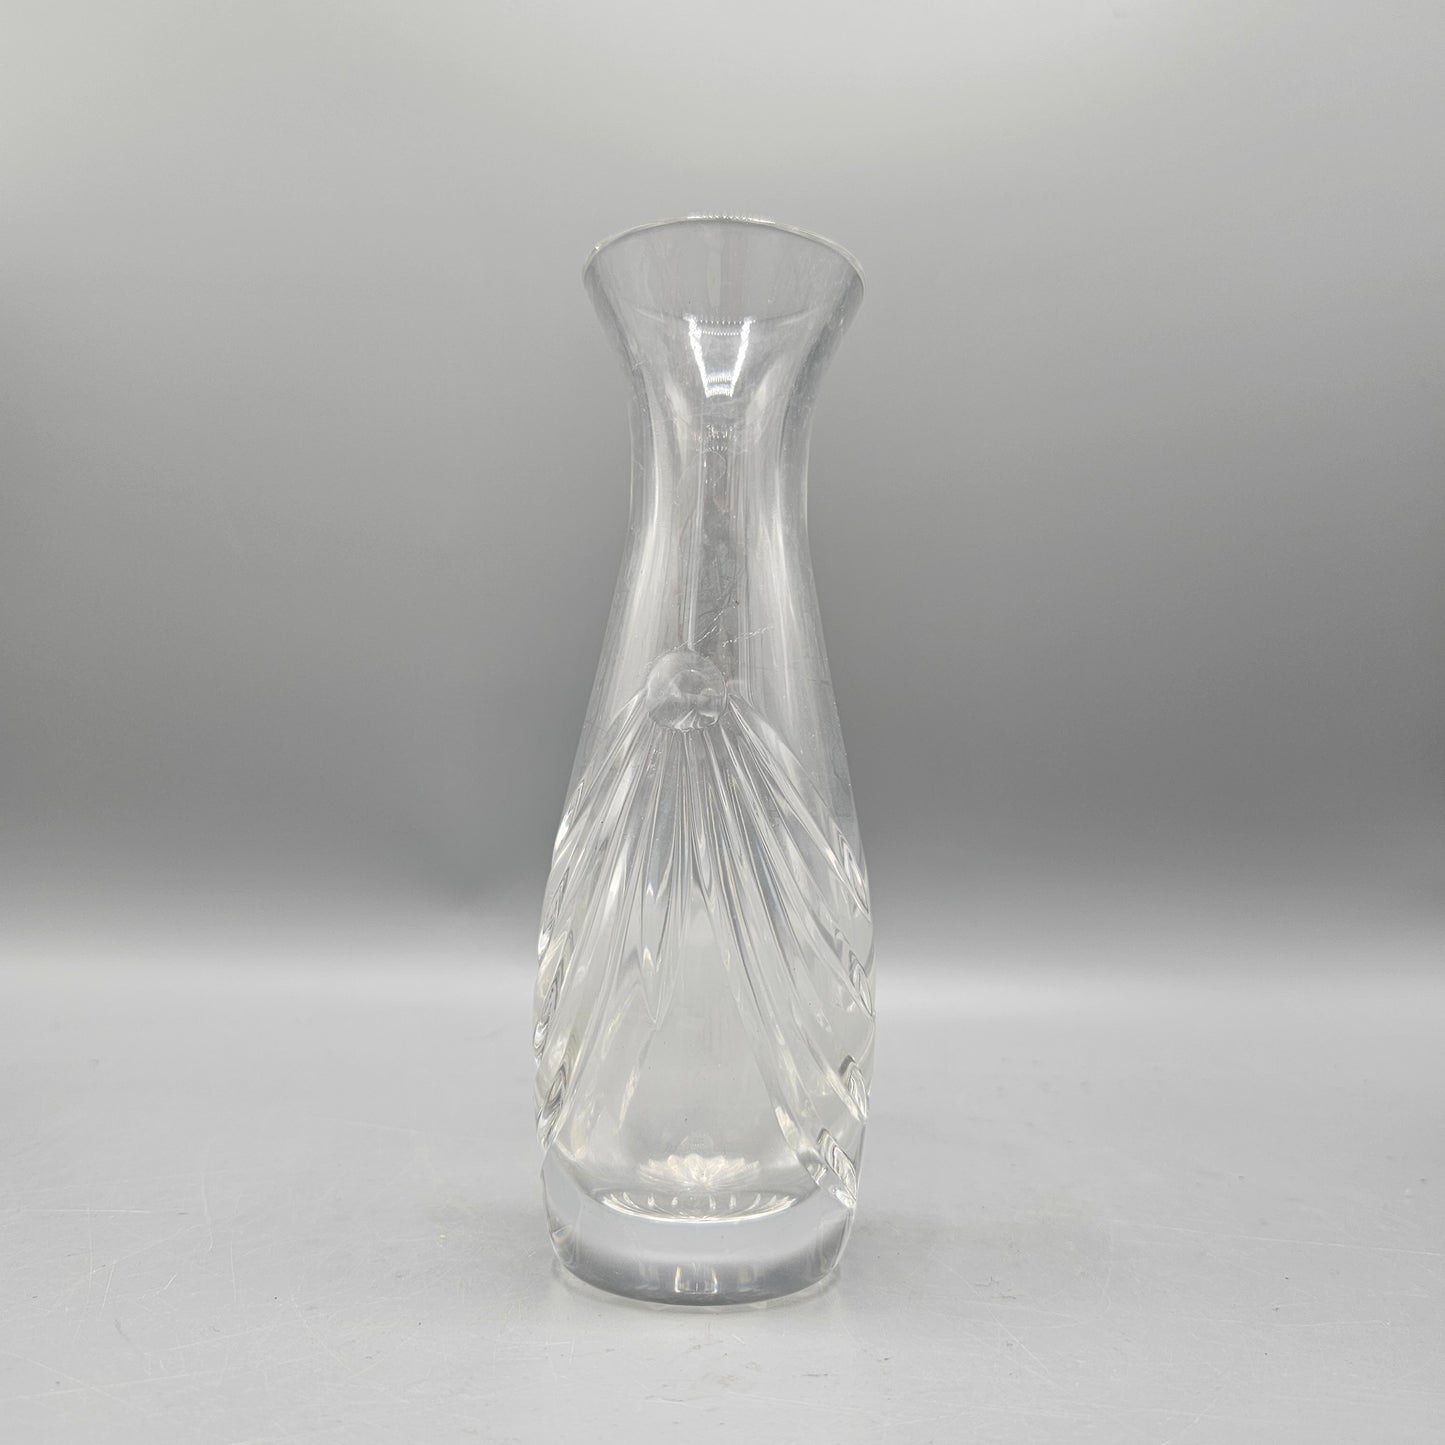 Contemporary Waterford Style Cut Crystal Vase